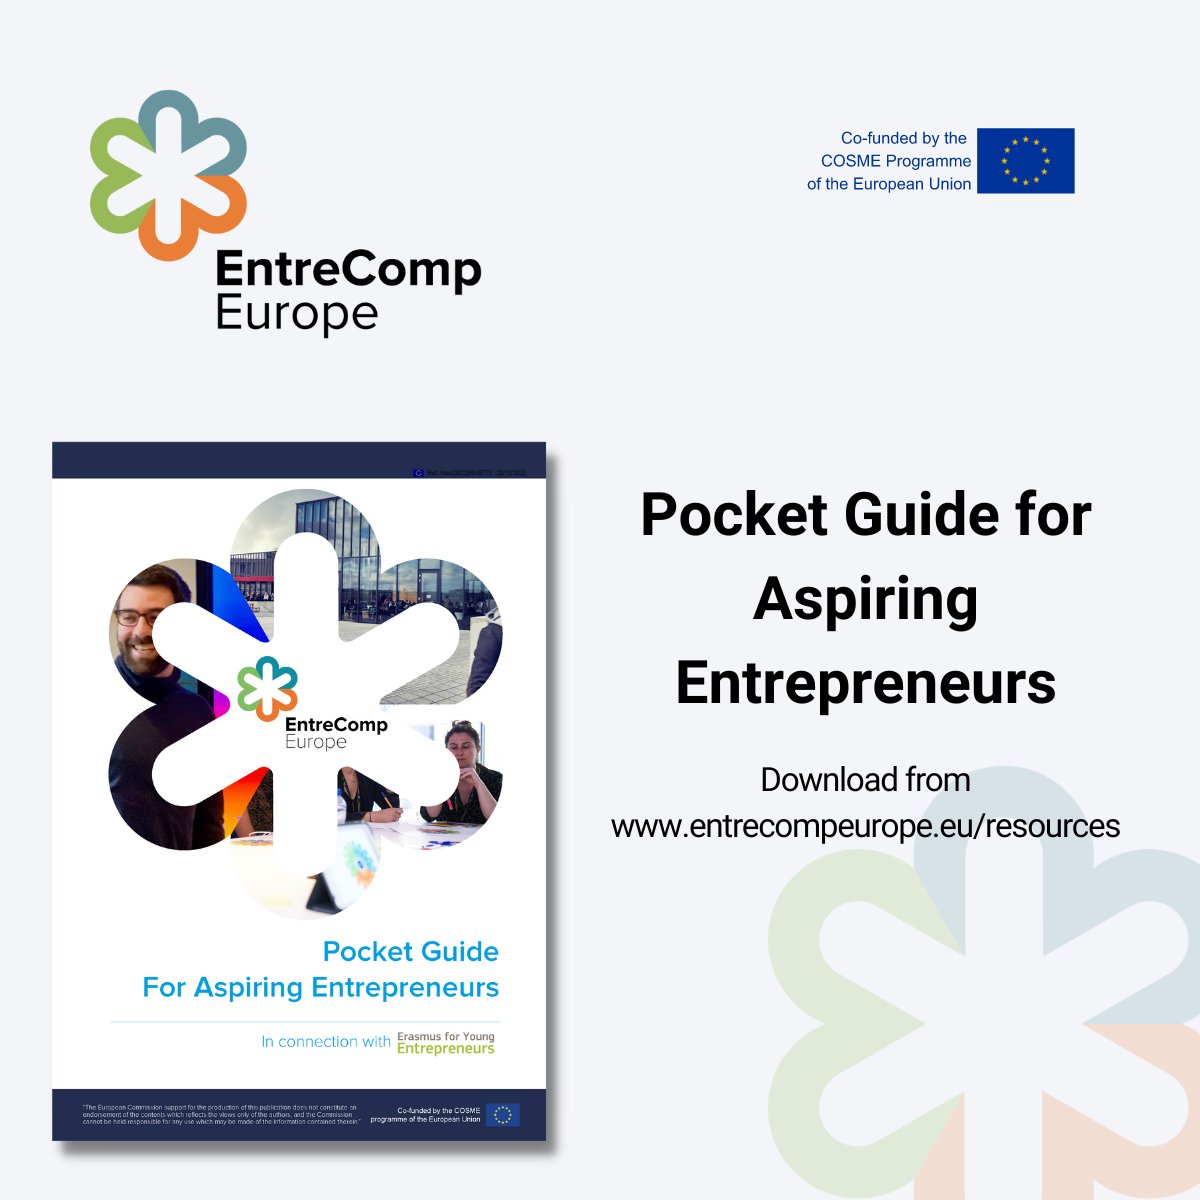 If you’re a young entrepreneur you need the @EntreCompEurope ‘Pocket Guide for Aspiring Entrepreneurs’, full of tools to guide your development guided by #EntreComp. Download now from 👉 entrecompeurope.eu/resources